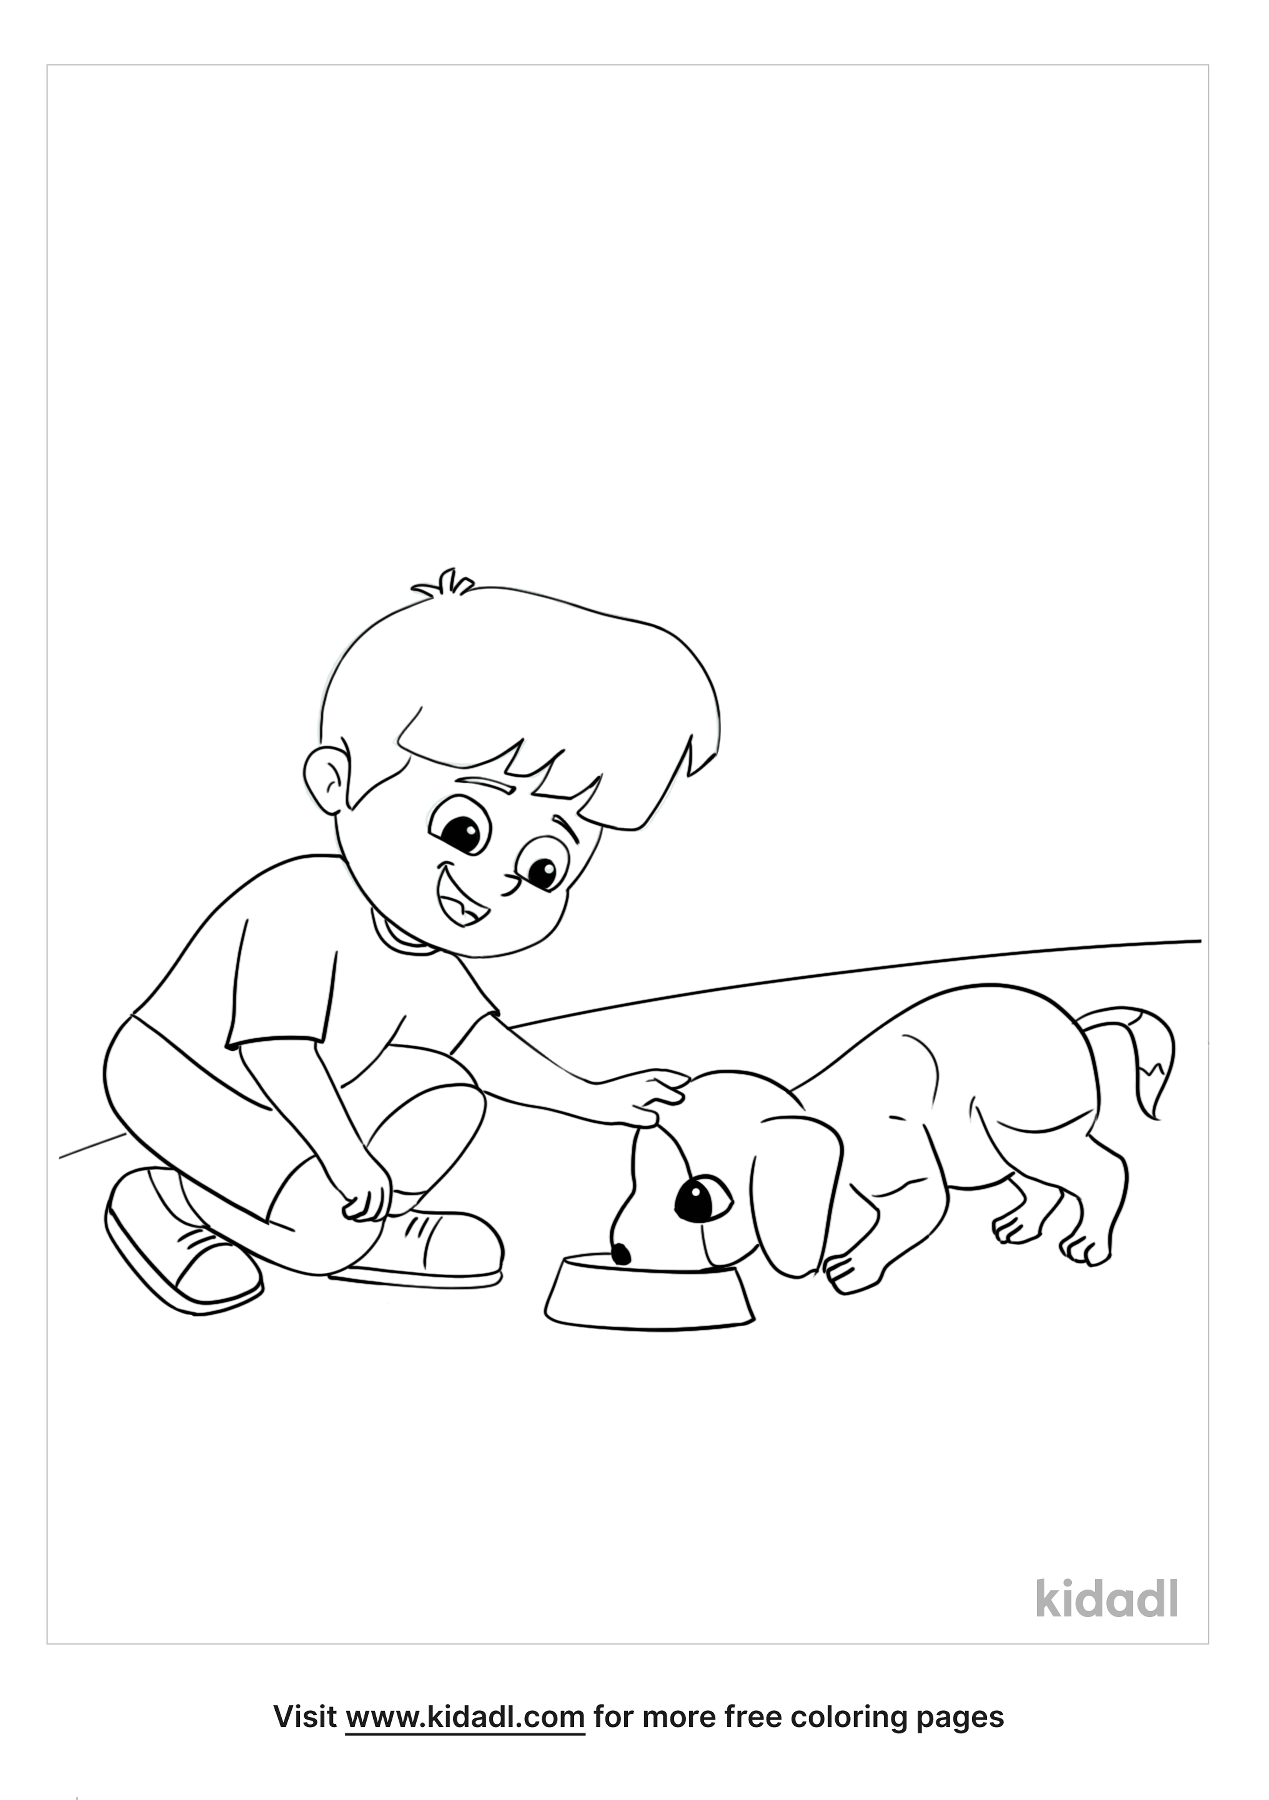 Caring For Animals Coloring Page